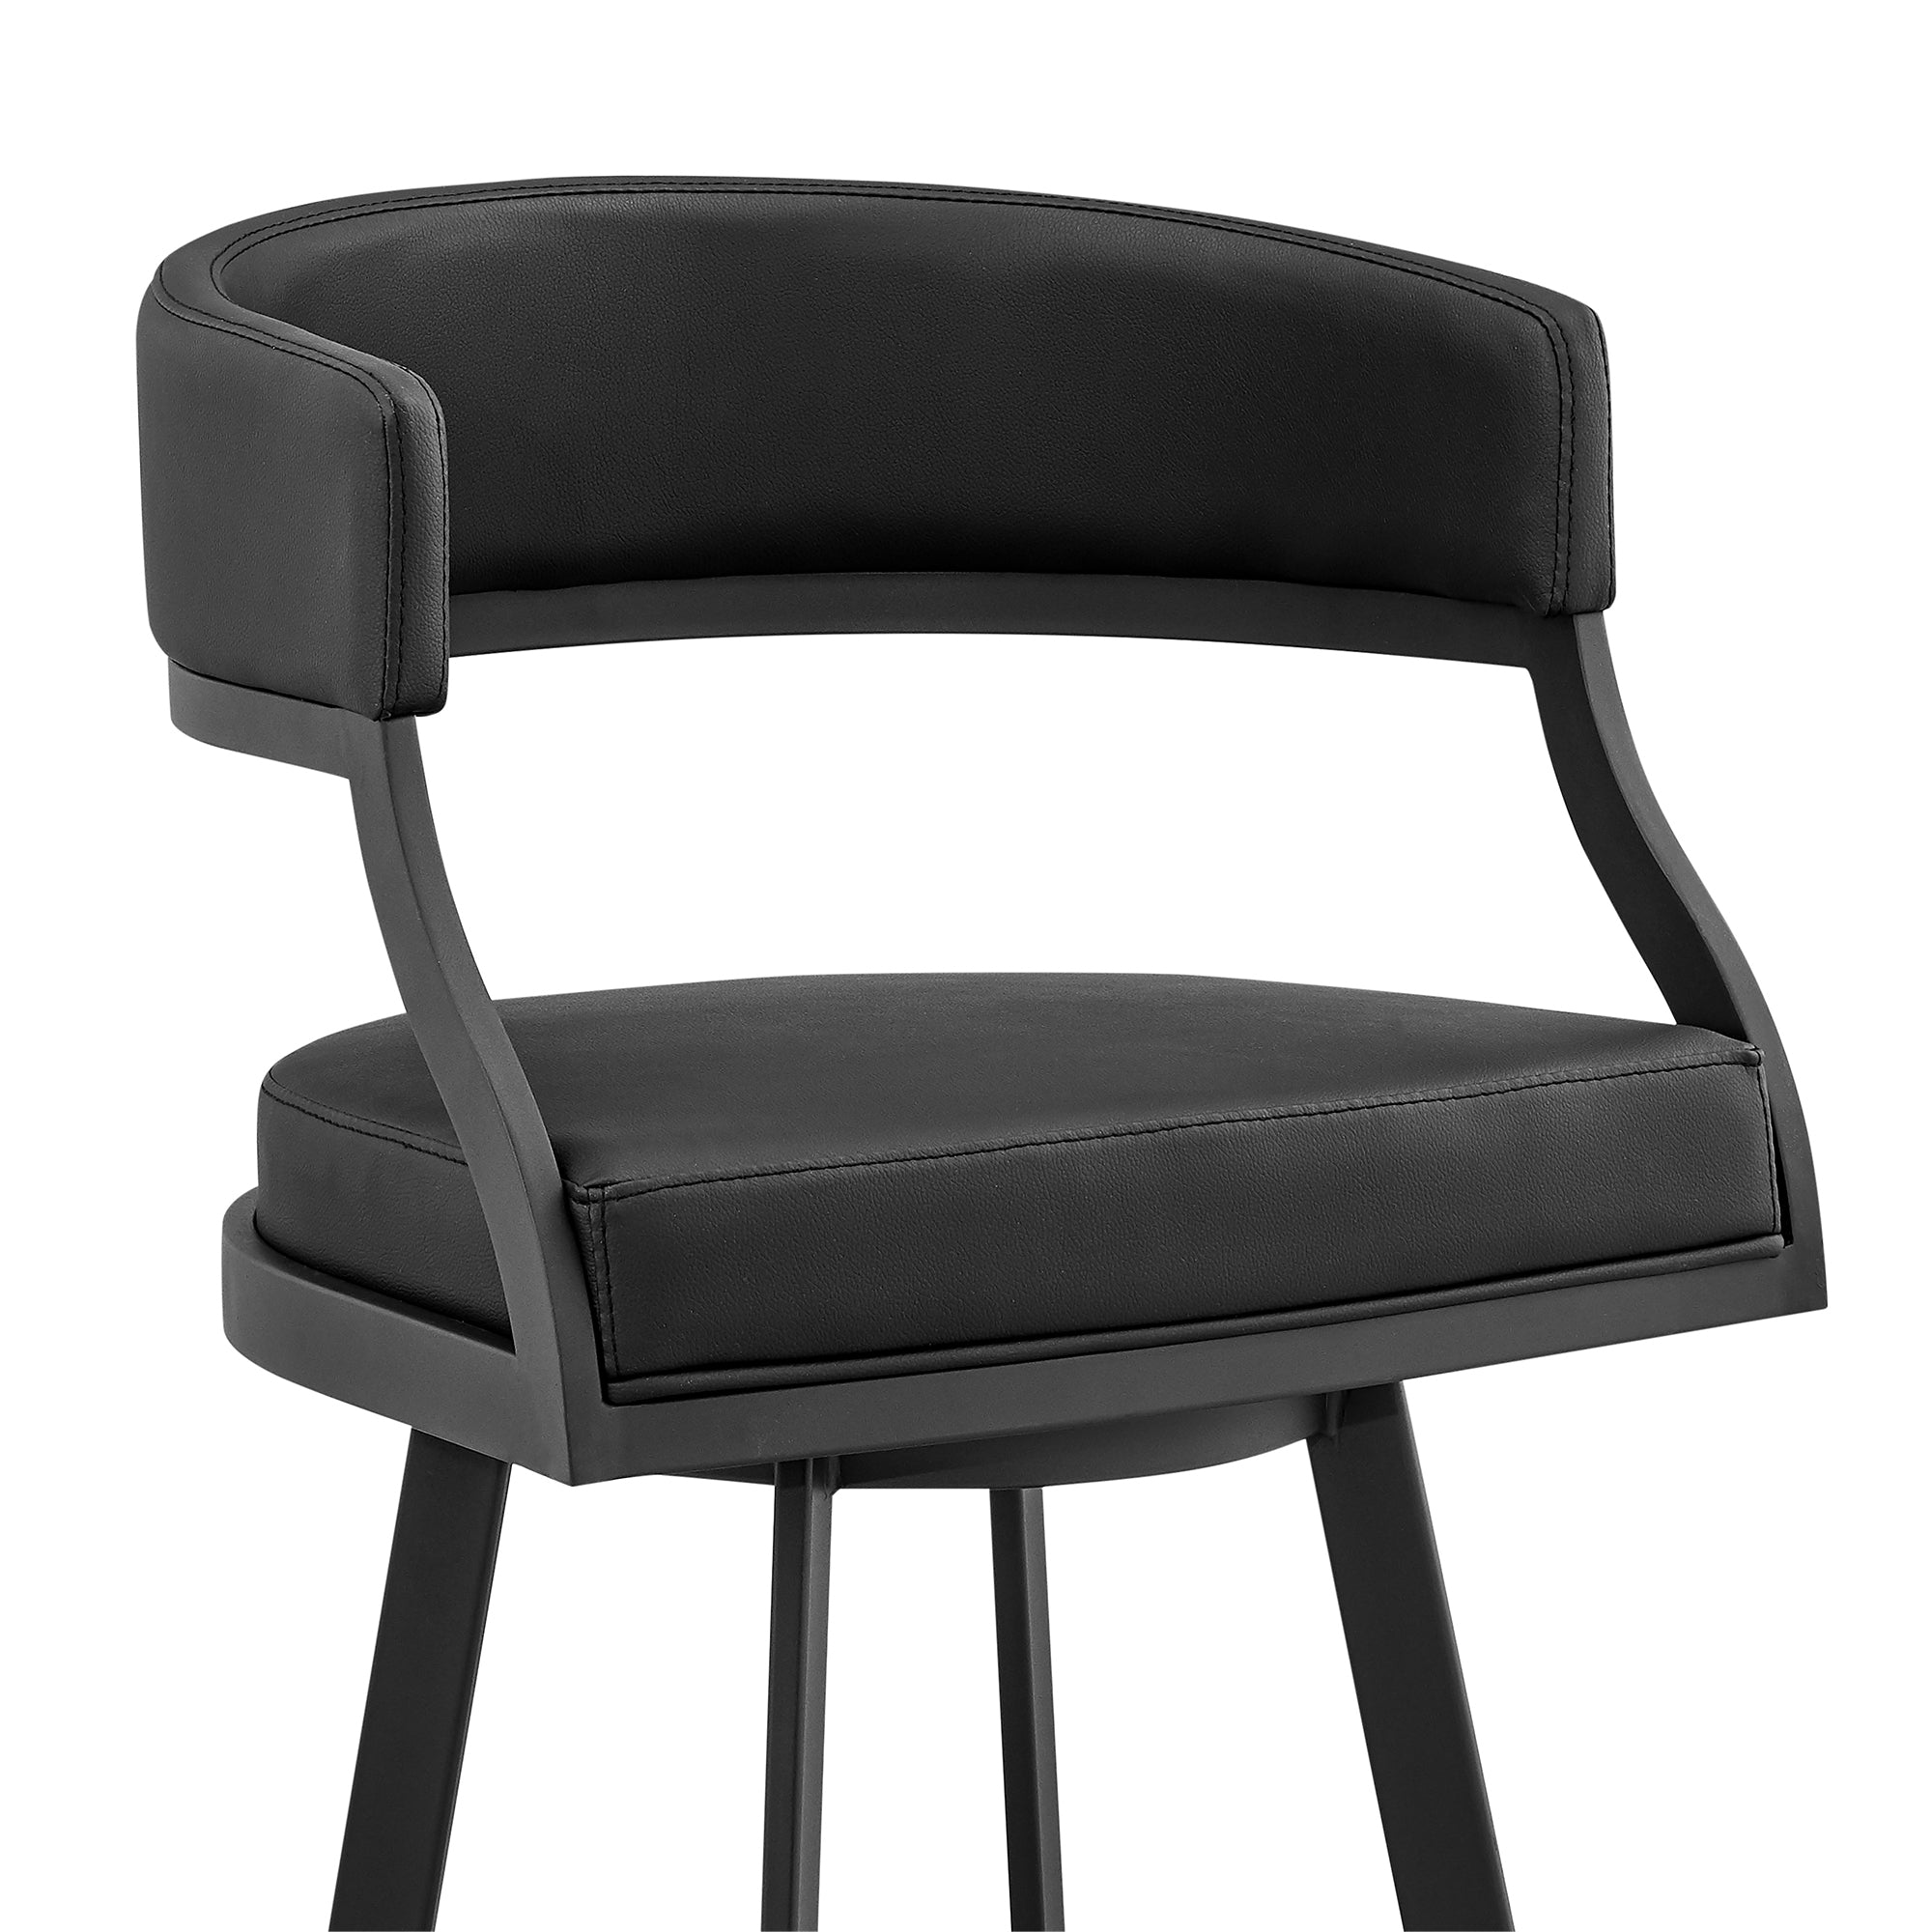 Armen Living - Dione Swivel Bar or Counter Stool in Black Faux Leather and Black Metal - 840254335035